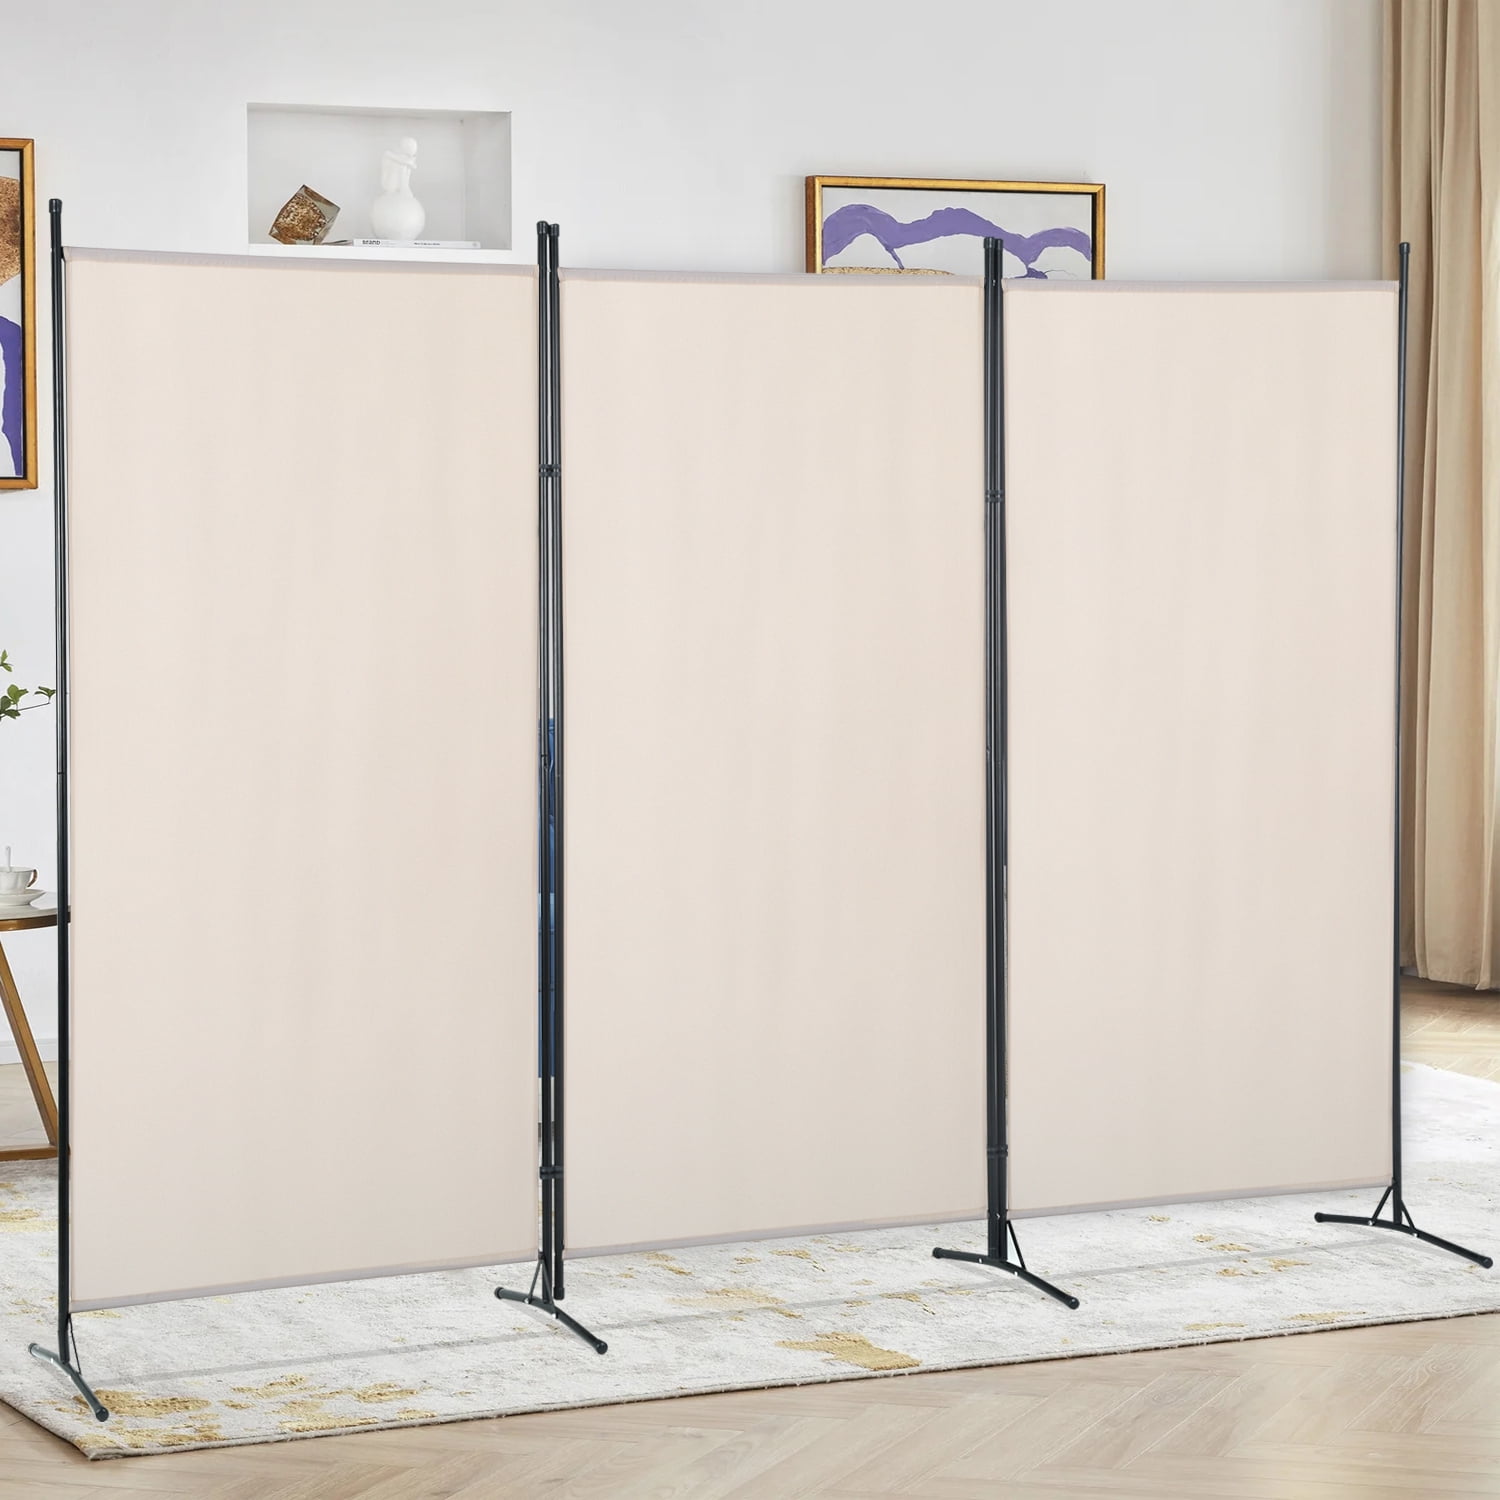 YASRKML 3 Panel Room Divider, Folding Privacy Screen for Office, Partition  Room Separators, Freestanding Room Fabric Panel 102x71.3, Beige, (RD202104)